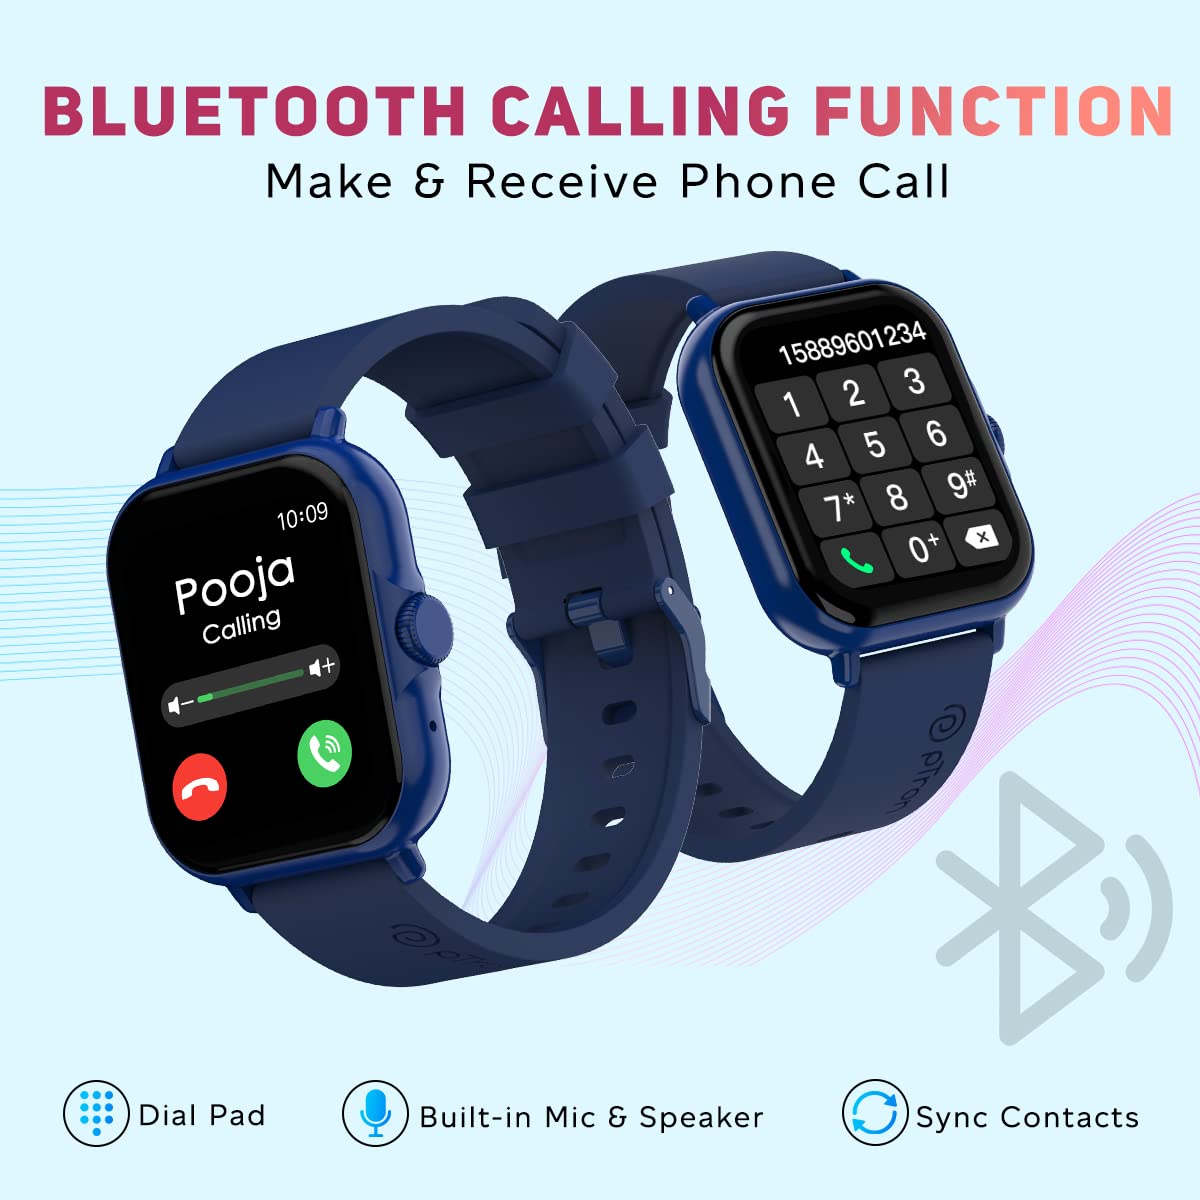 pTron Pulsefit P61+ 1.85" Full Touch Display Bluetooth Calling Smartwatch, Functional Crown, 580 NITS Brightness, HR, SpO2, Watch Faces, Inbuilt Games, 5 Days Battery Life & IP68 Waterproof (Blue)